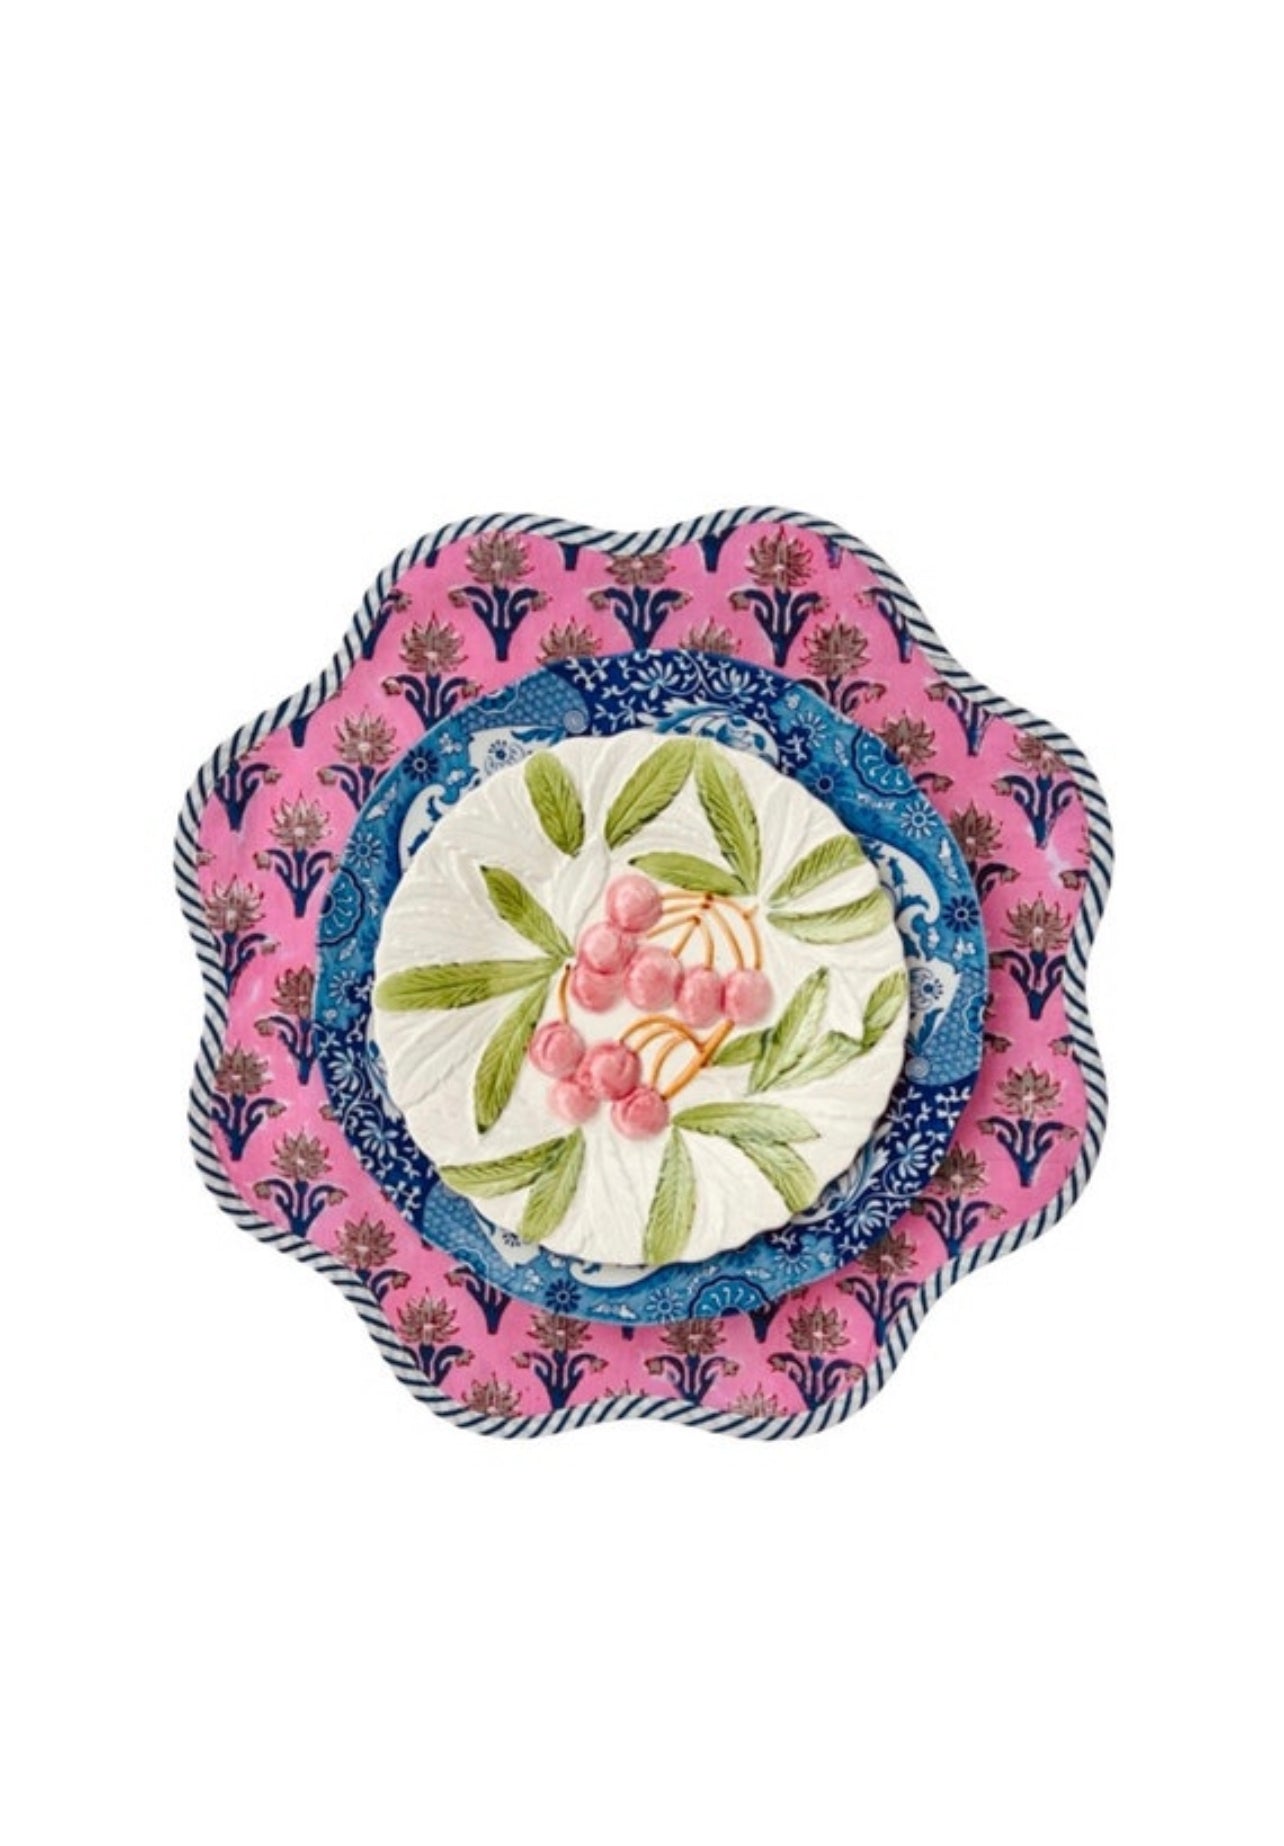 Scalloped pink and blue block print placemat, set of 4